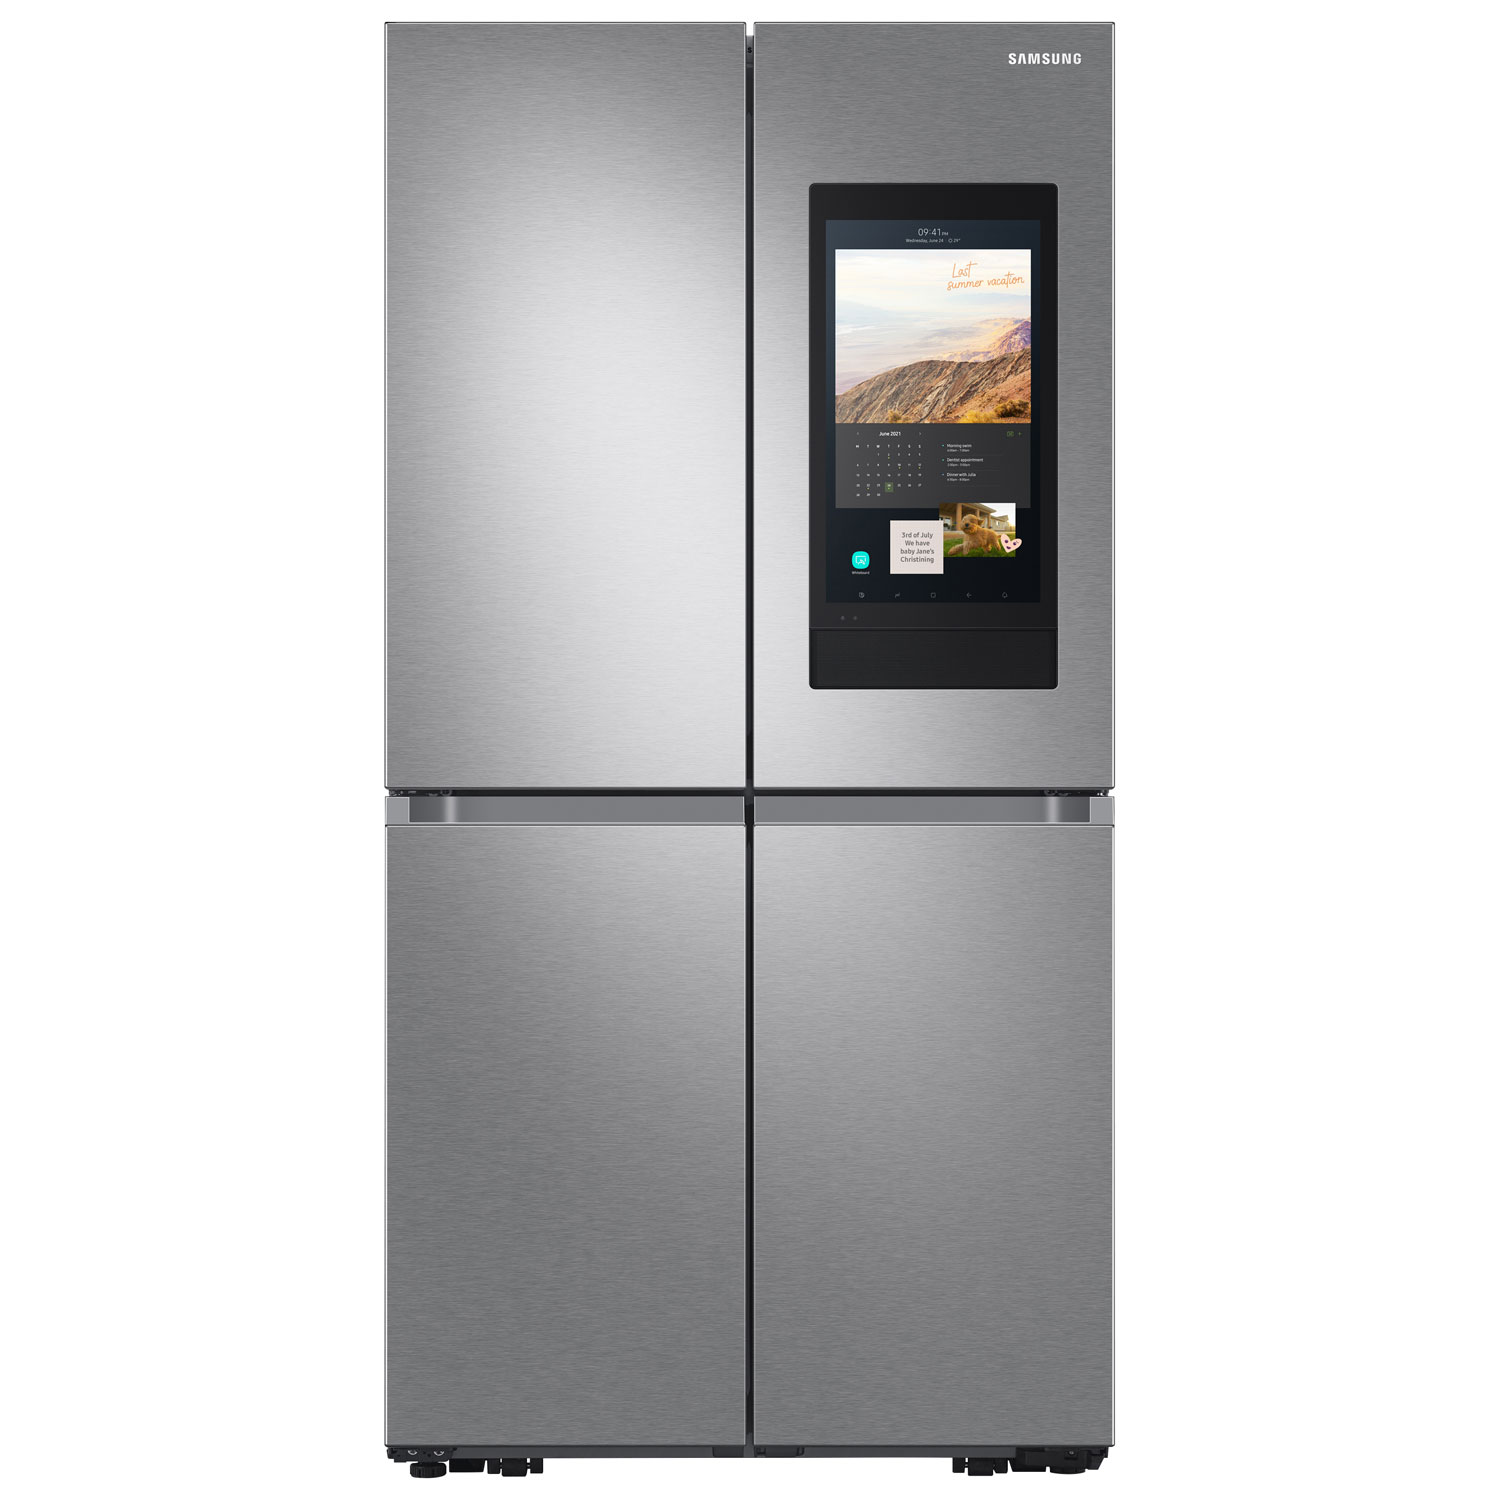 Samsung Family Hub 36" 22.8 Cu. Ft. French Door Refrigerator (RF23A9771SR) - Stainless Steel